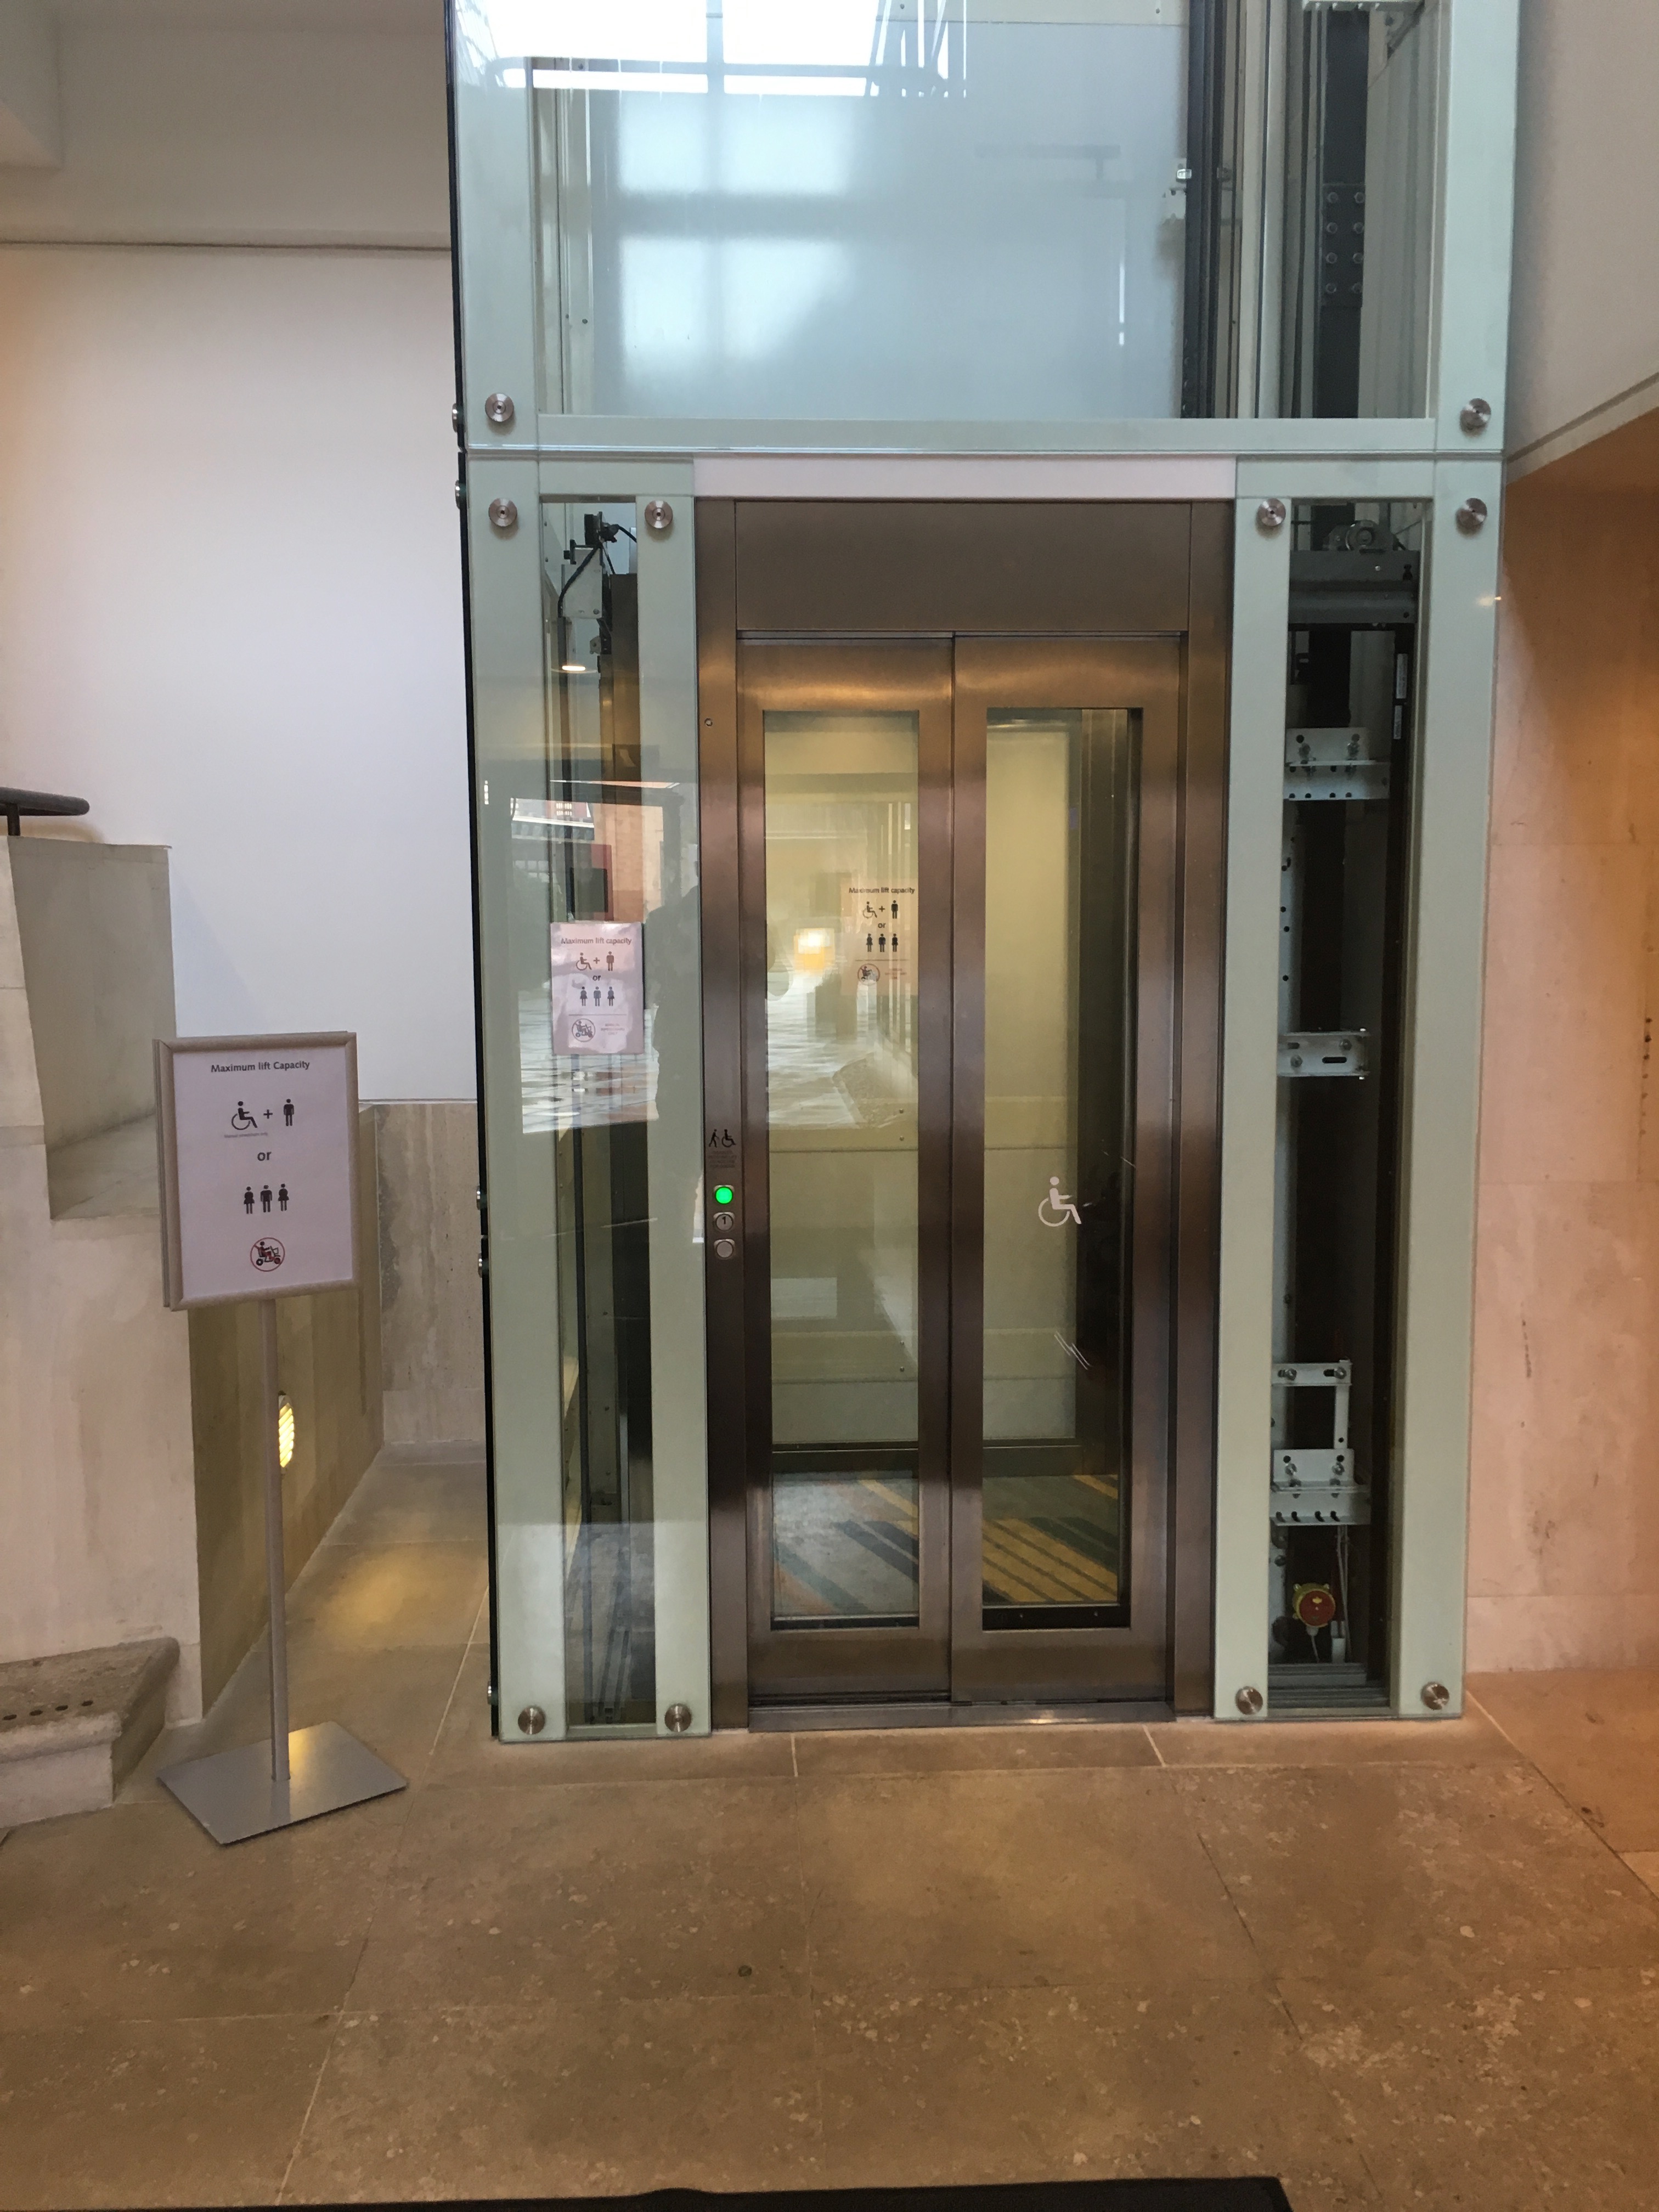 Disabled Access Lift in British Library